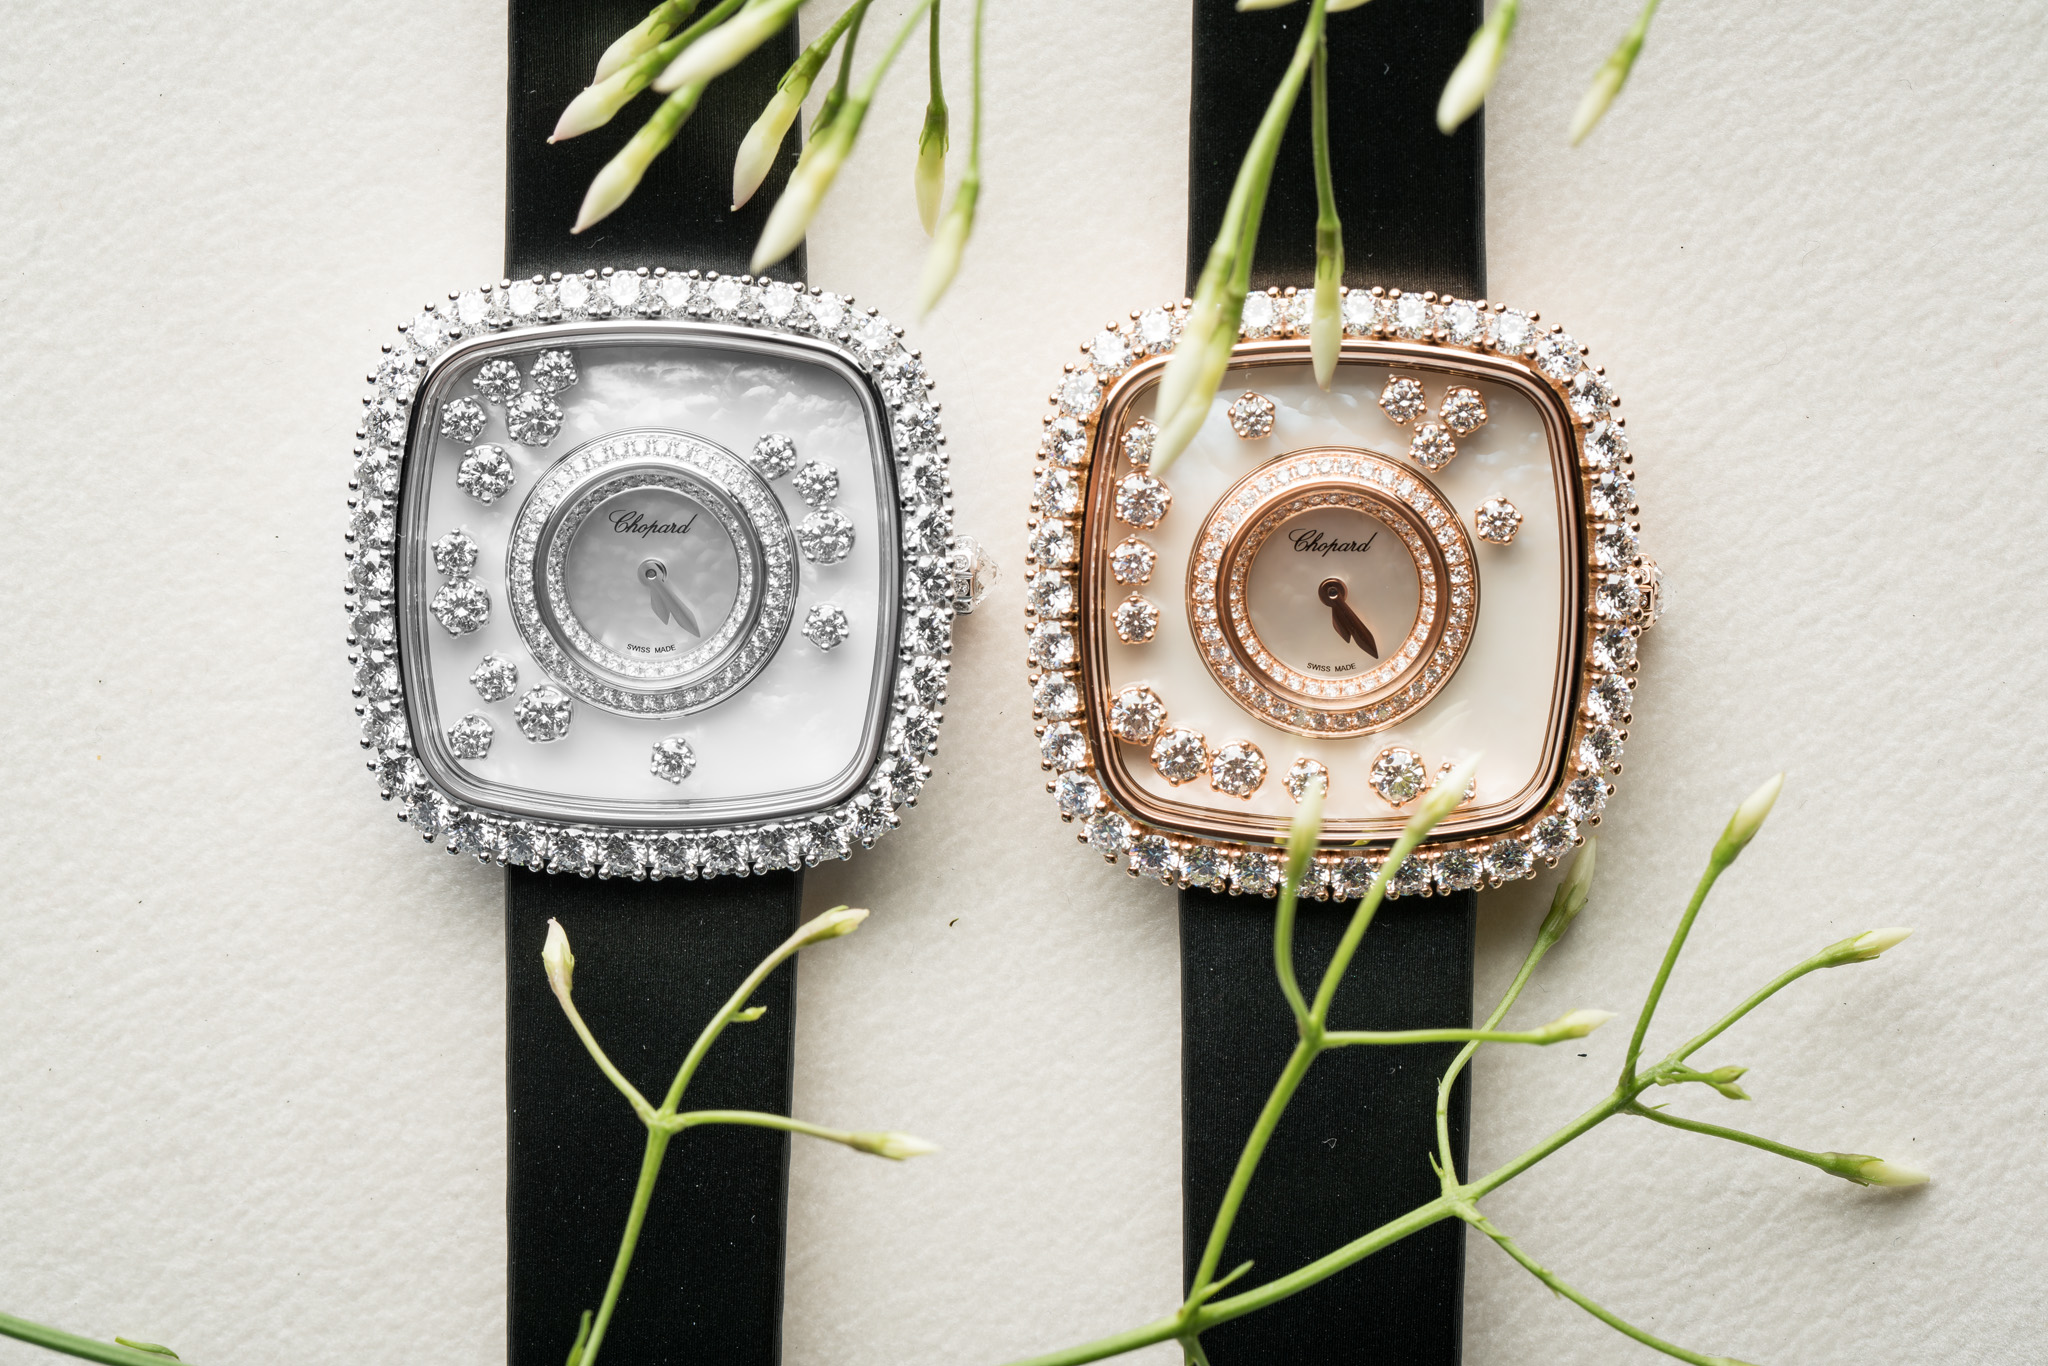 Baselworld 2016: Introducing The New Chopard Happy Diamonds Watch Collection